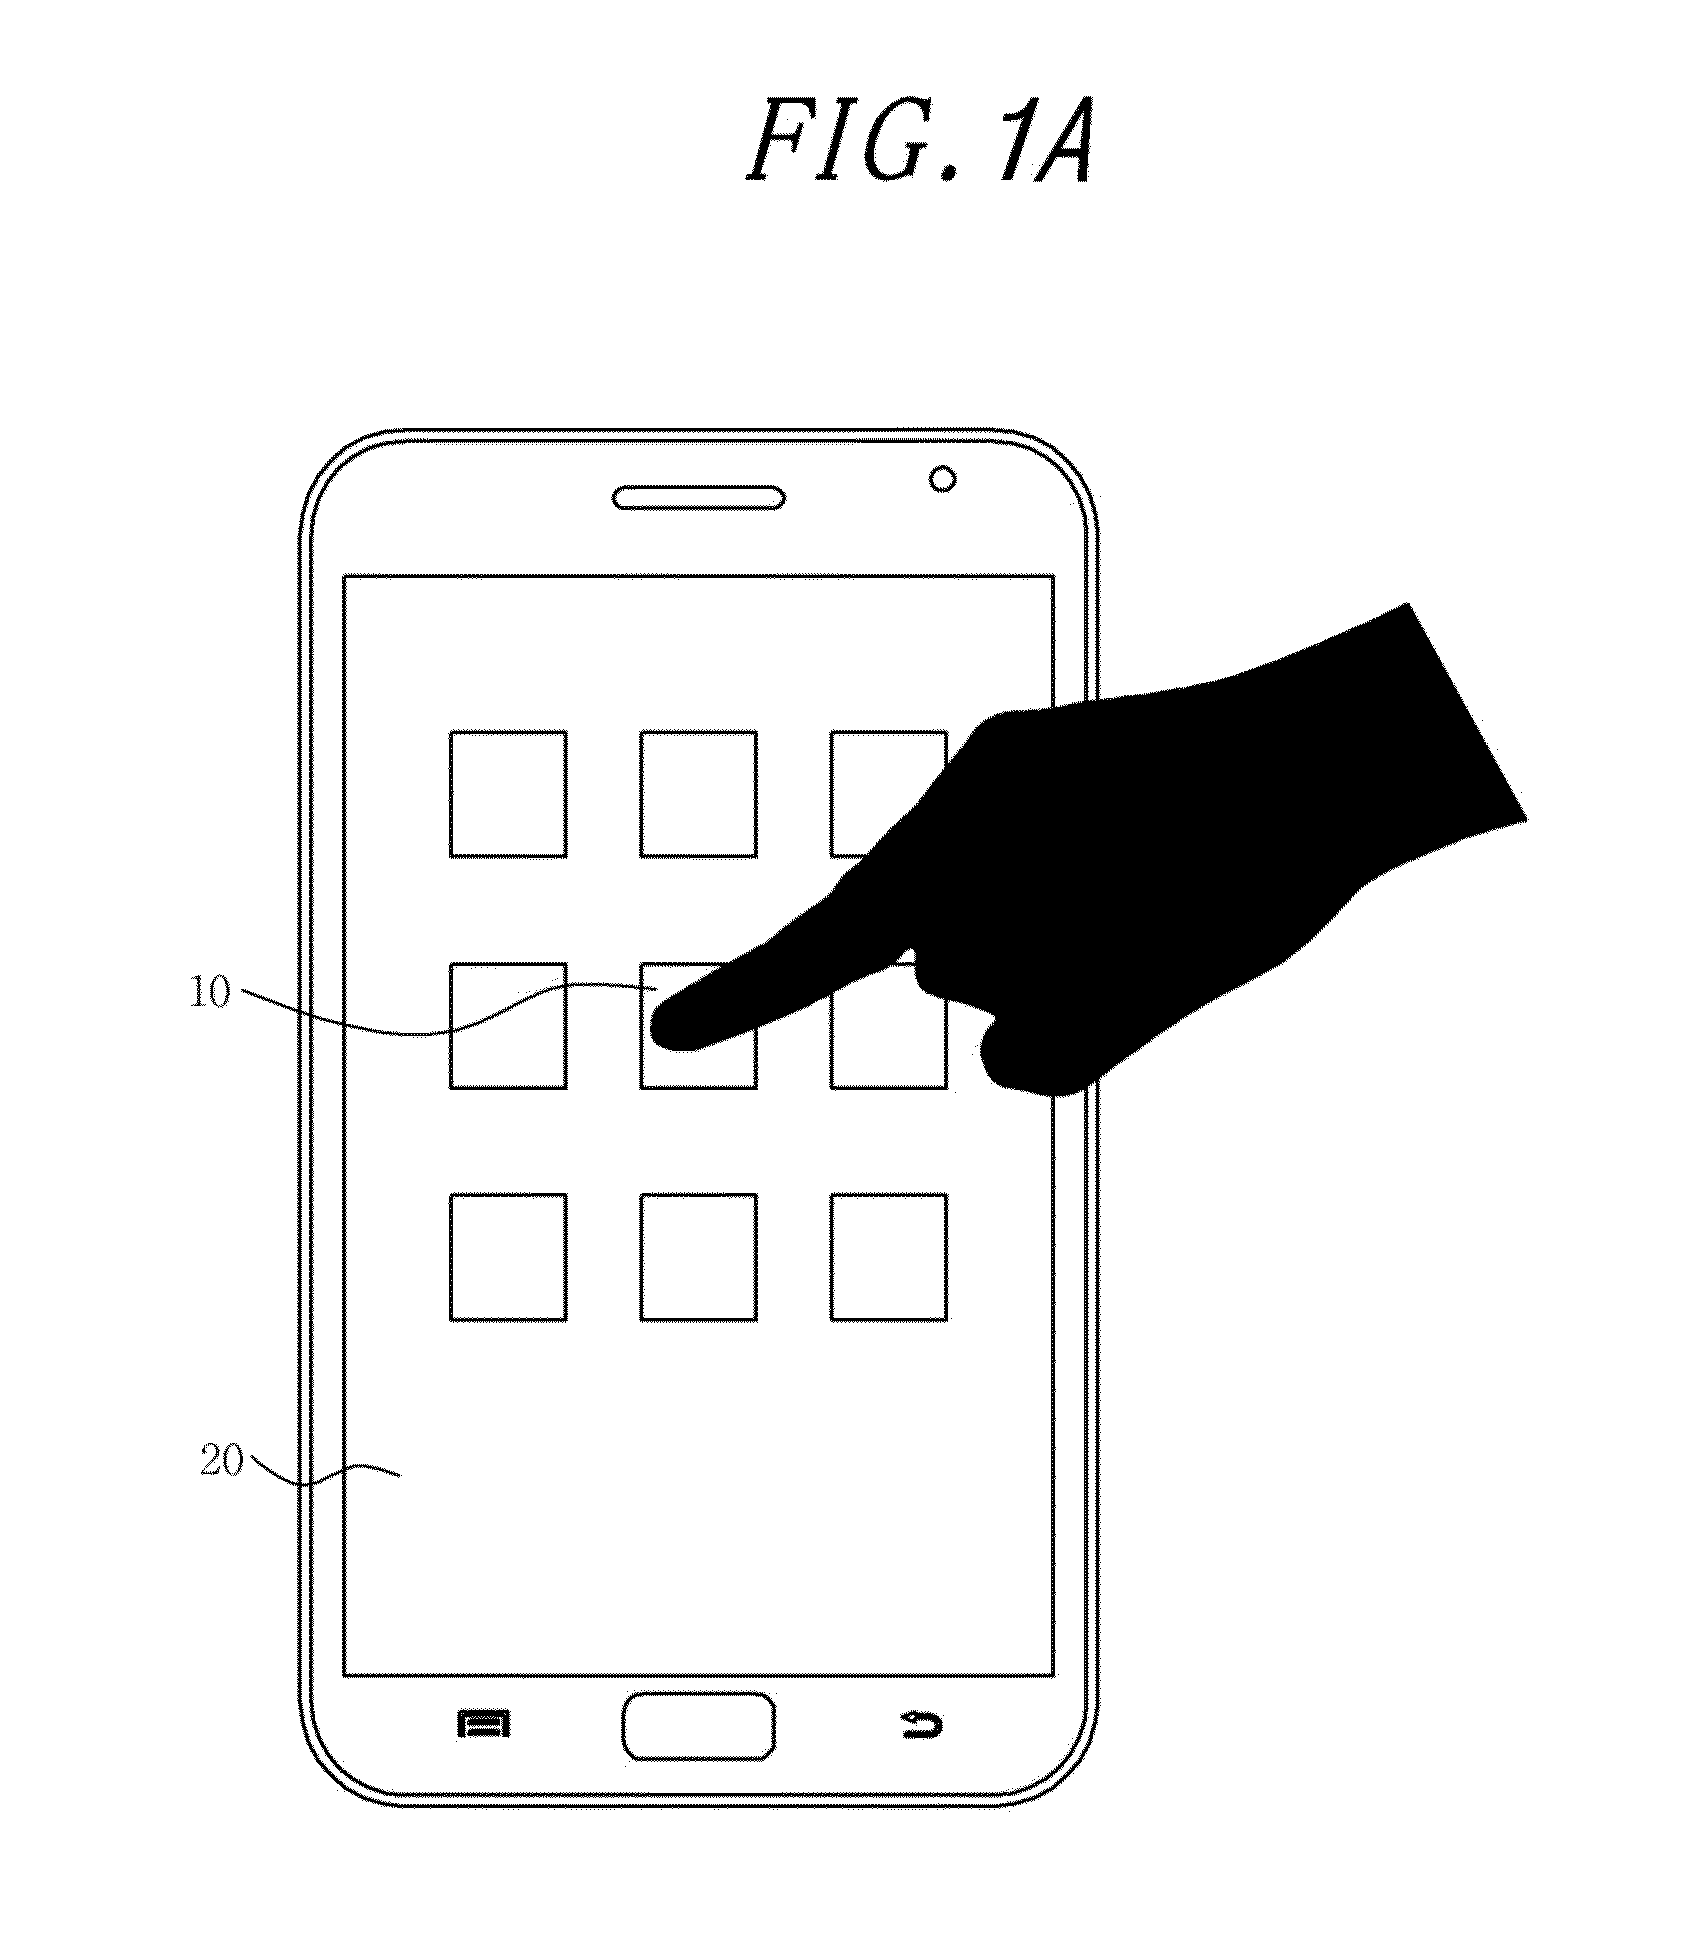 Method and system for activating different interactive functions using different types of finger contacts